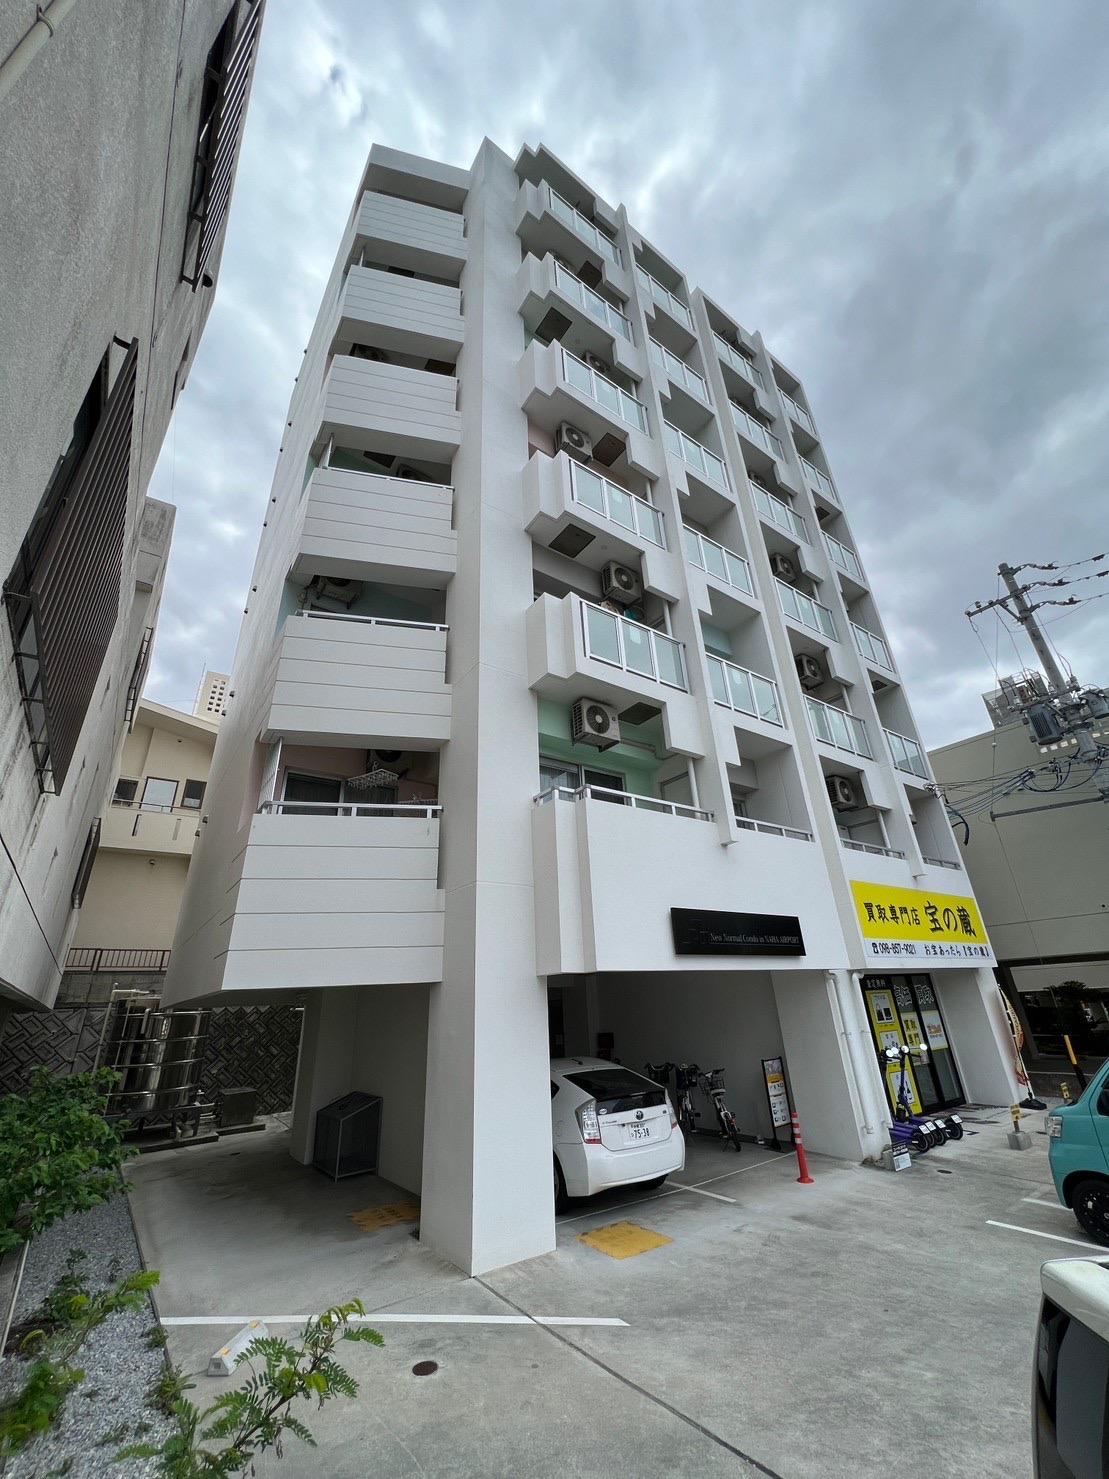 Naha, Sale for Entire Building, Investment Property